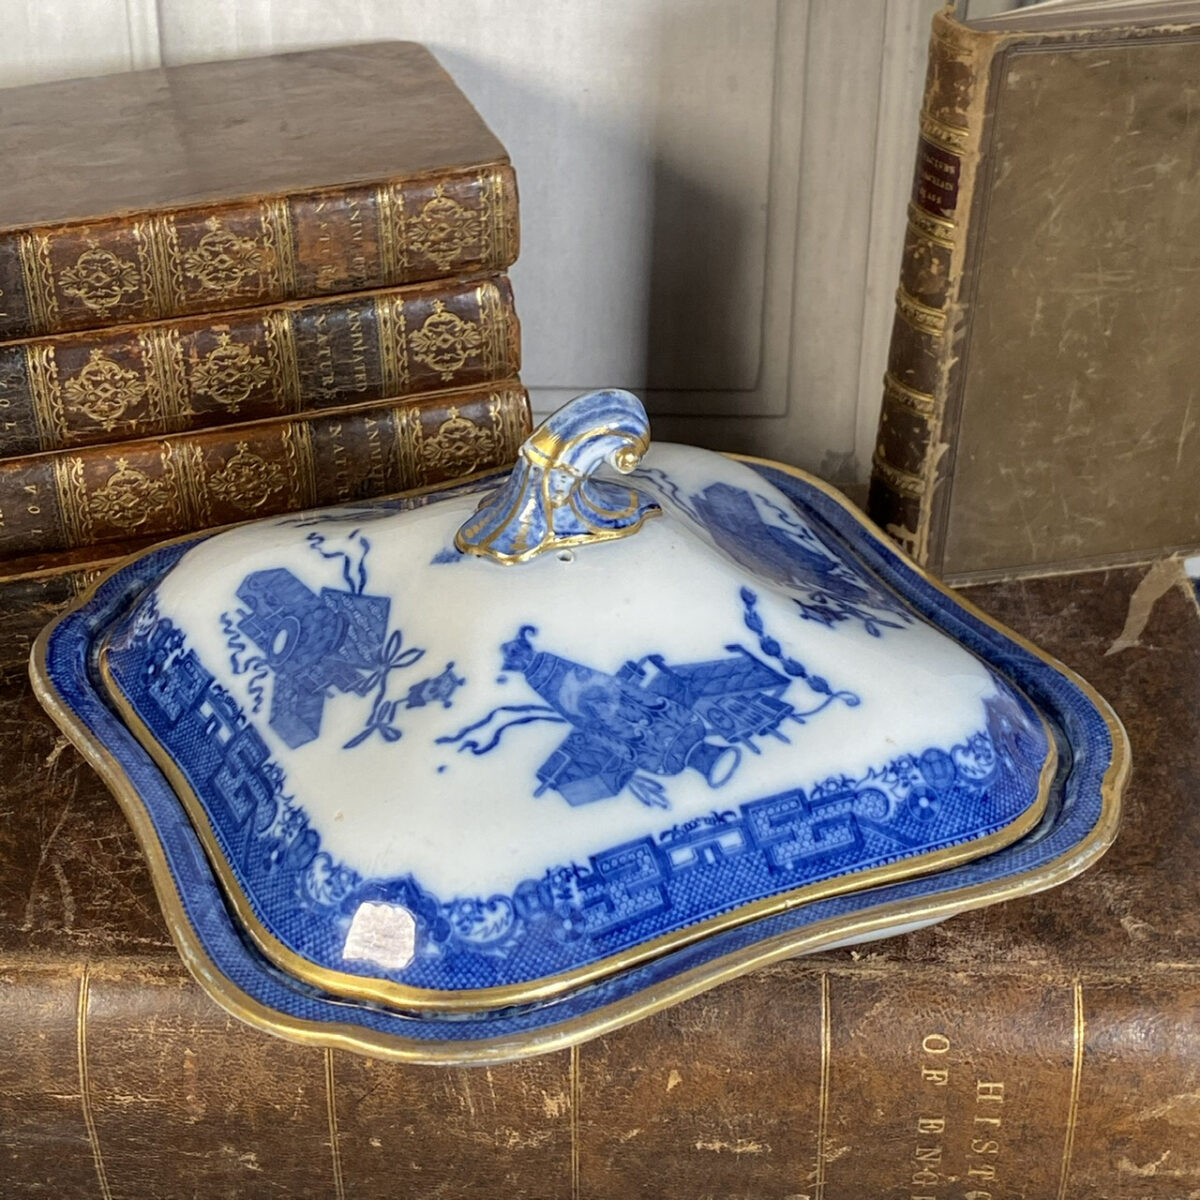 Early Spode Earthenware Tureen & Cover.